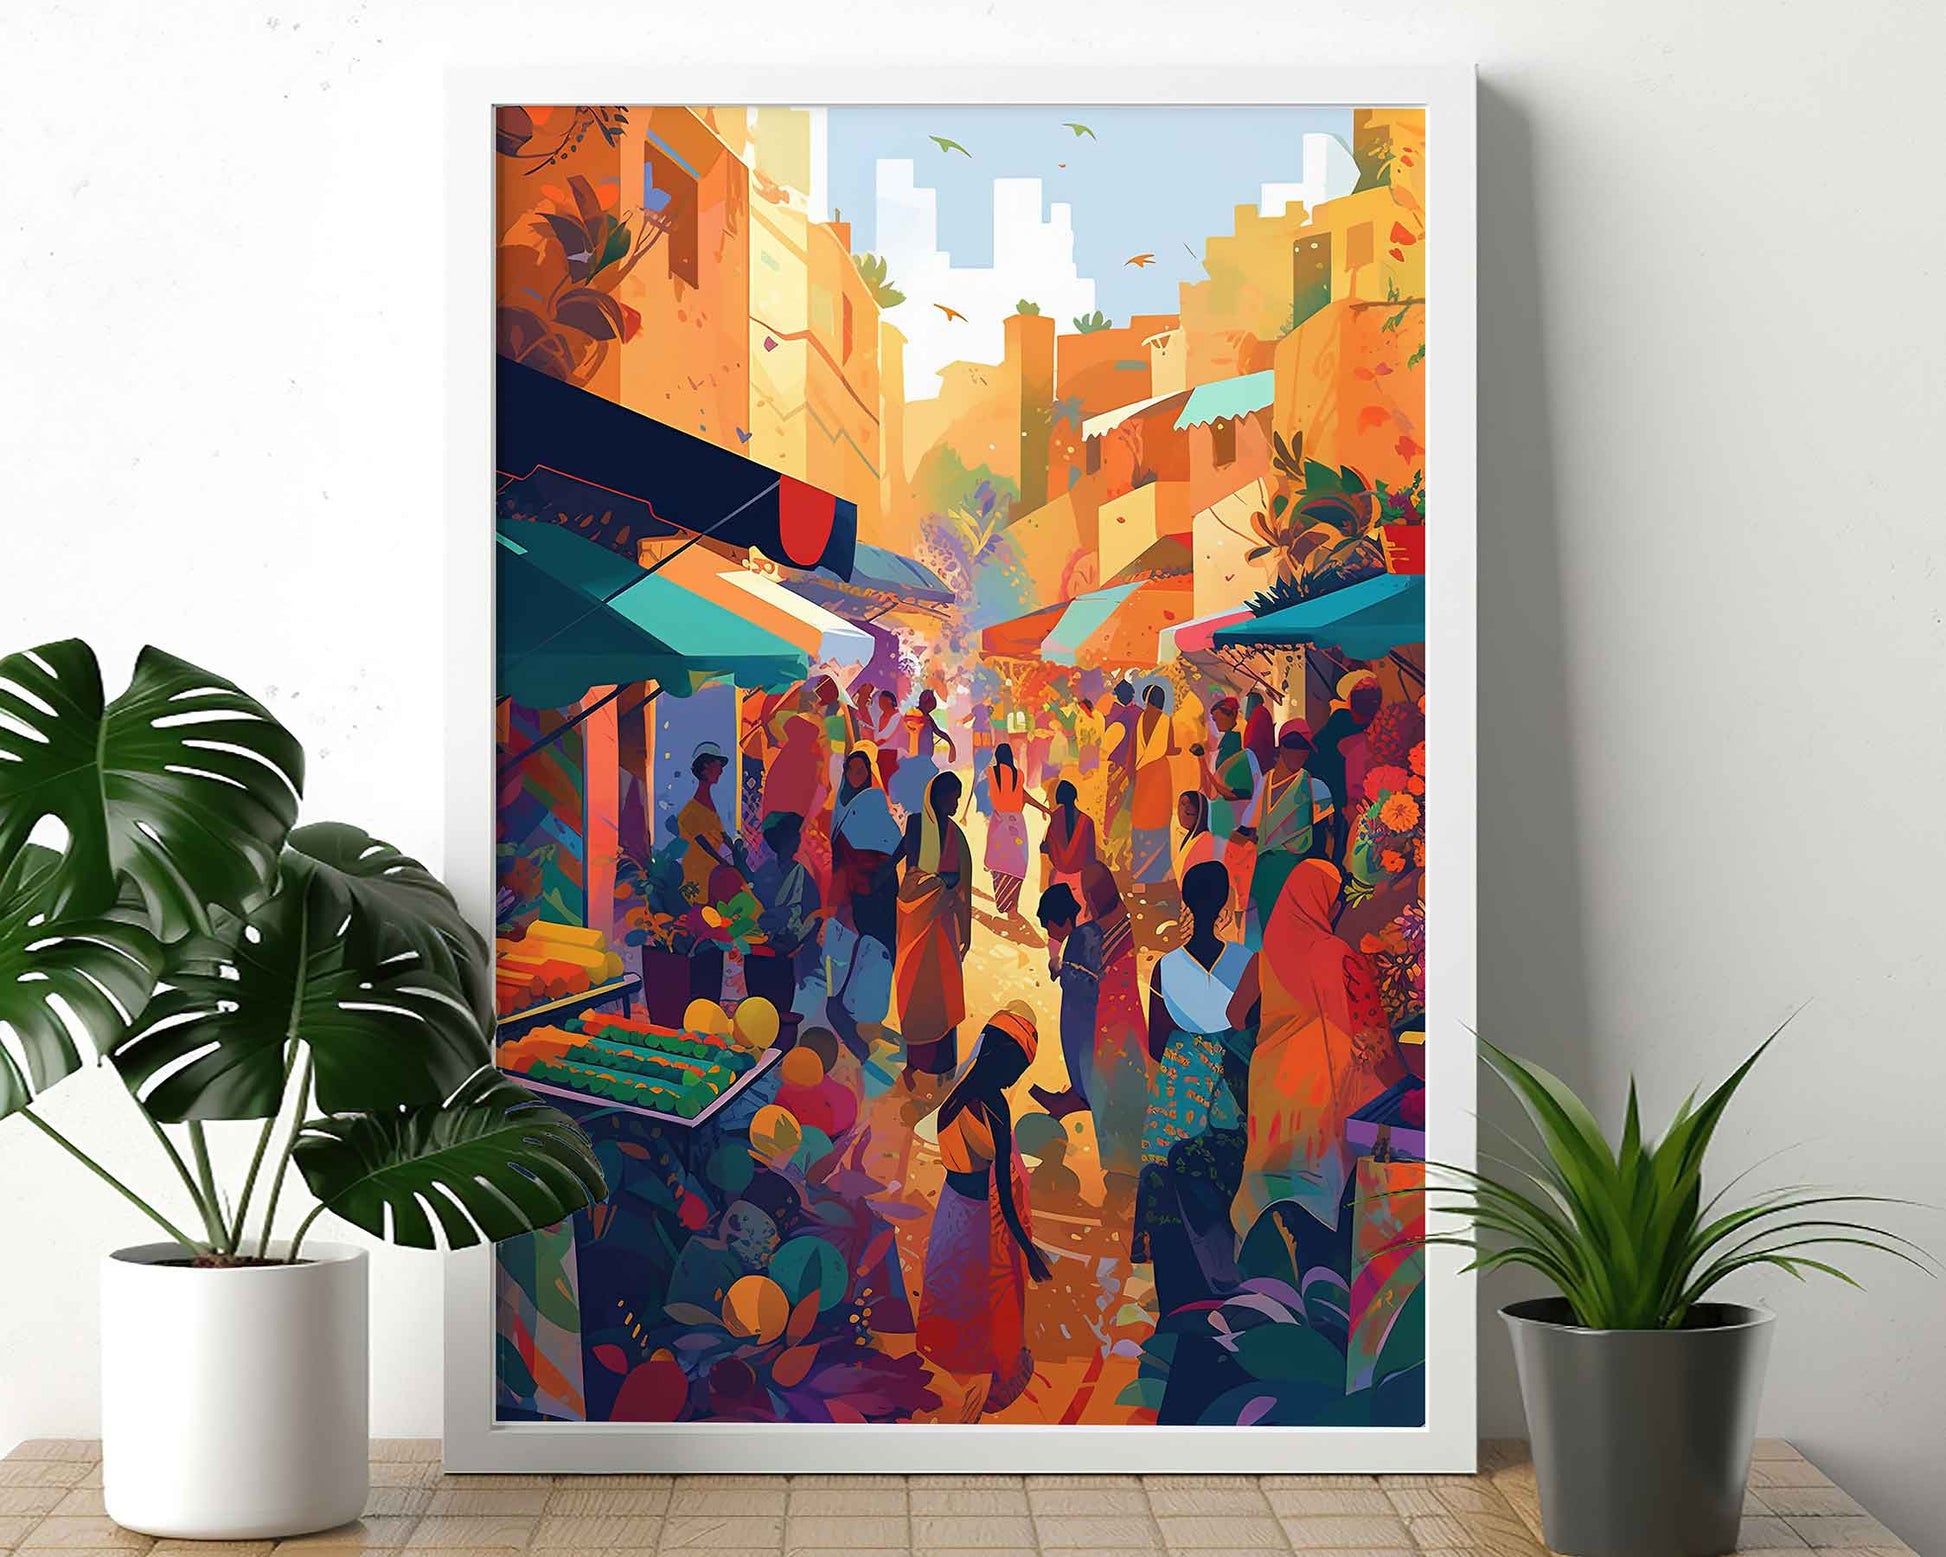 Framed Image of Moroccan Street Markets Colourful Abstract African Wall Art Prints